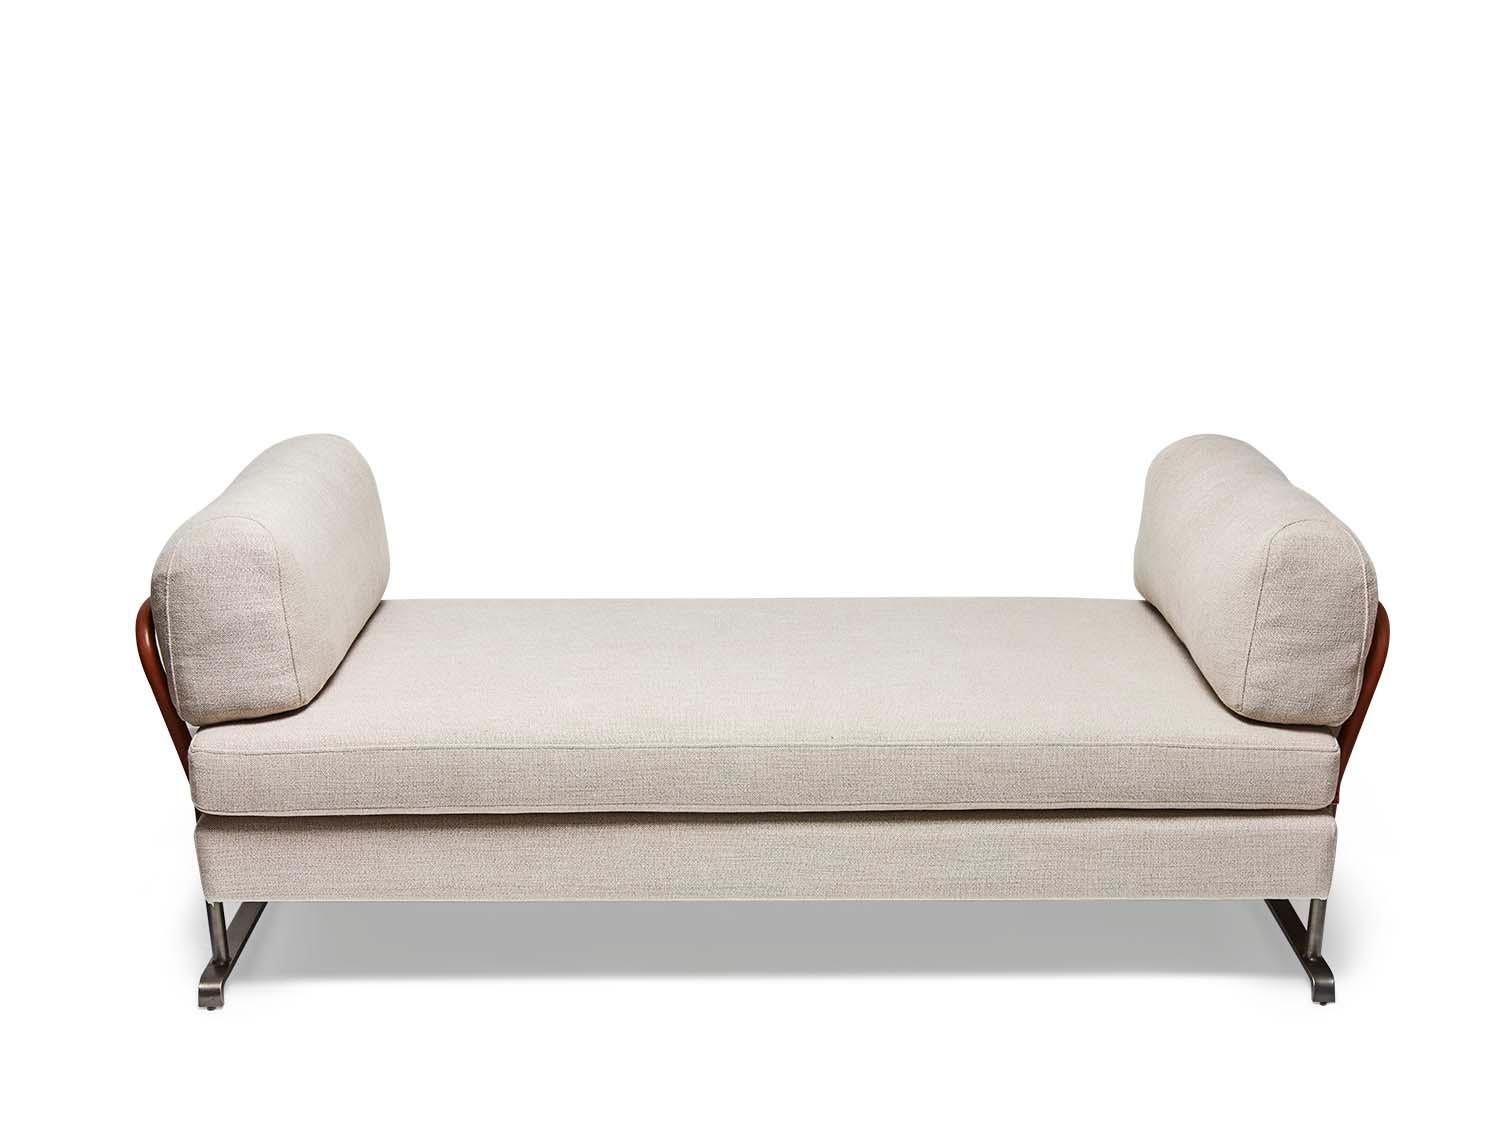 Mid-Century Modern Grey Linen and Leather Maker's Daybed by Lawson-Fenning